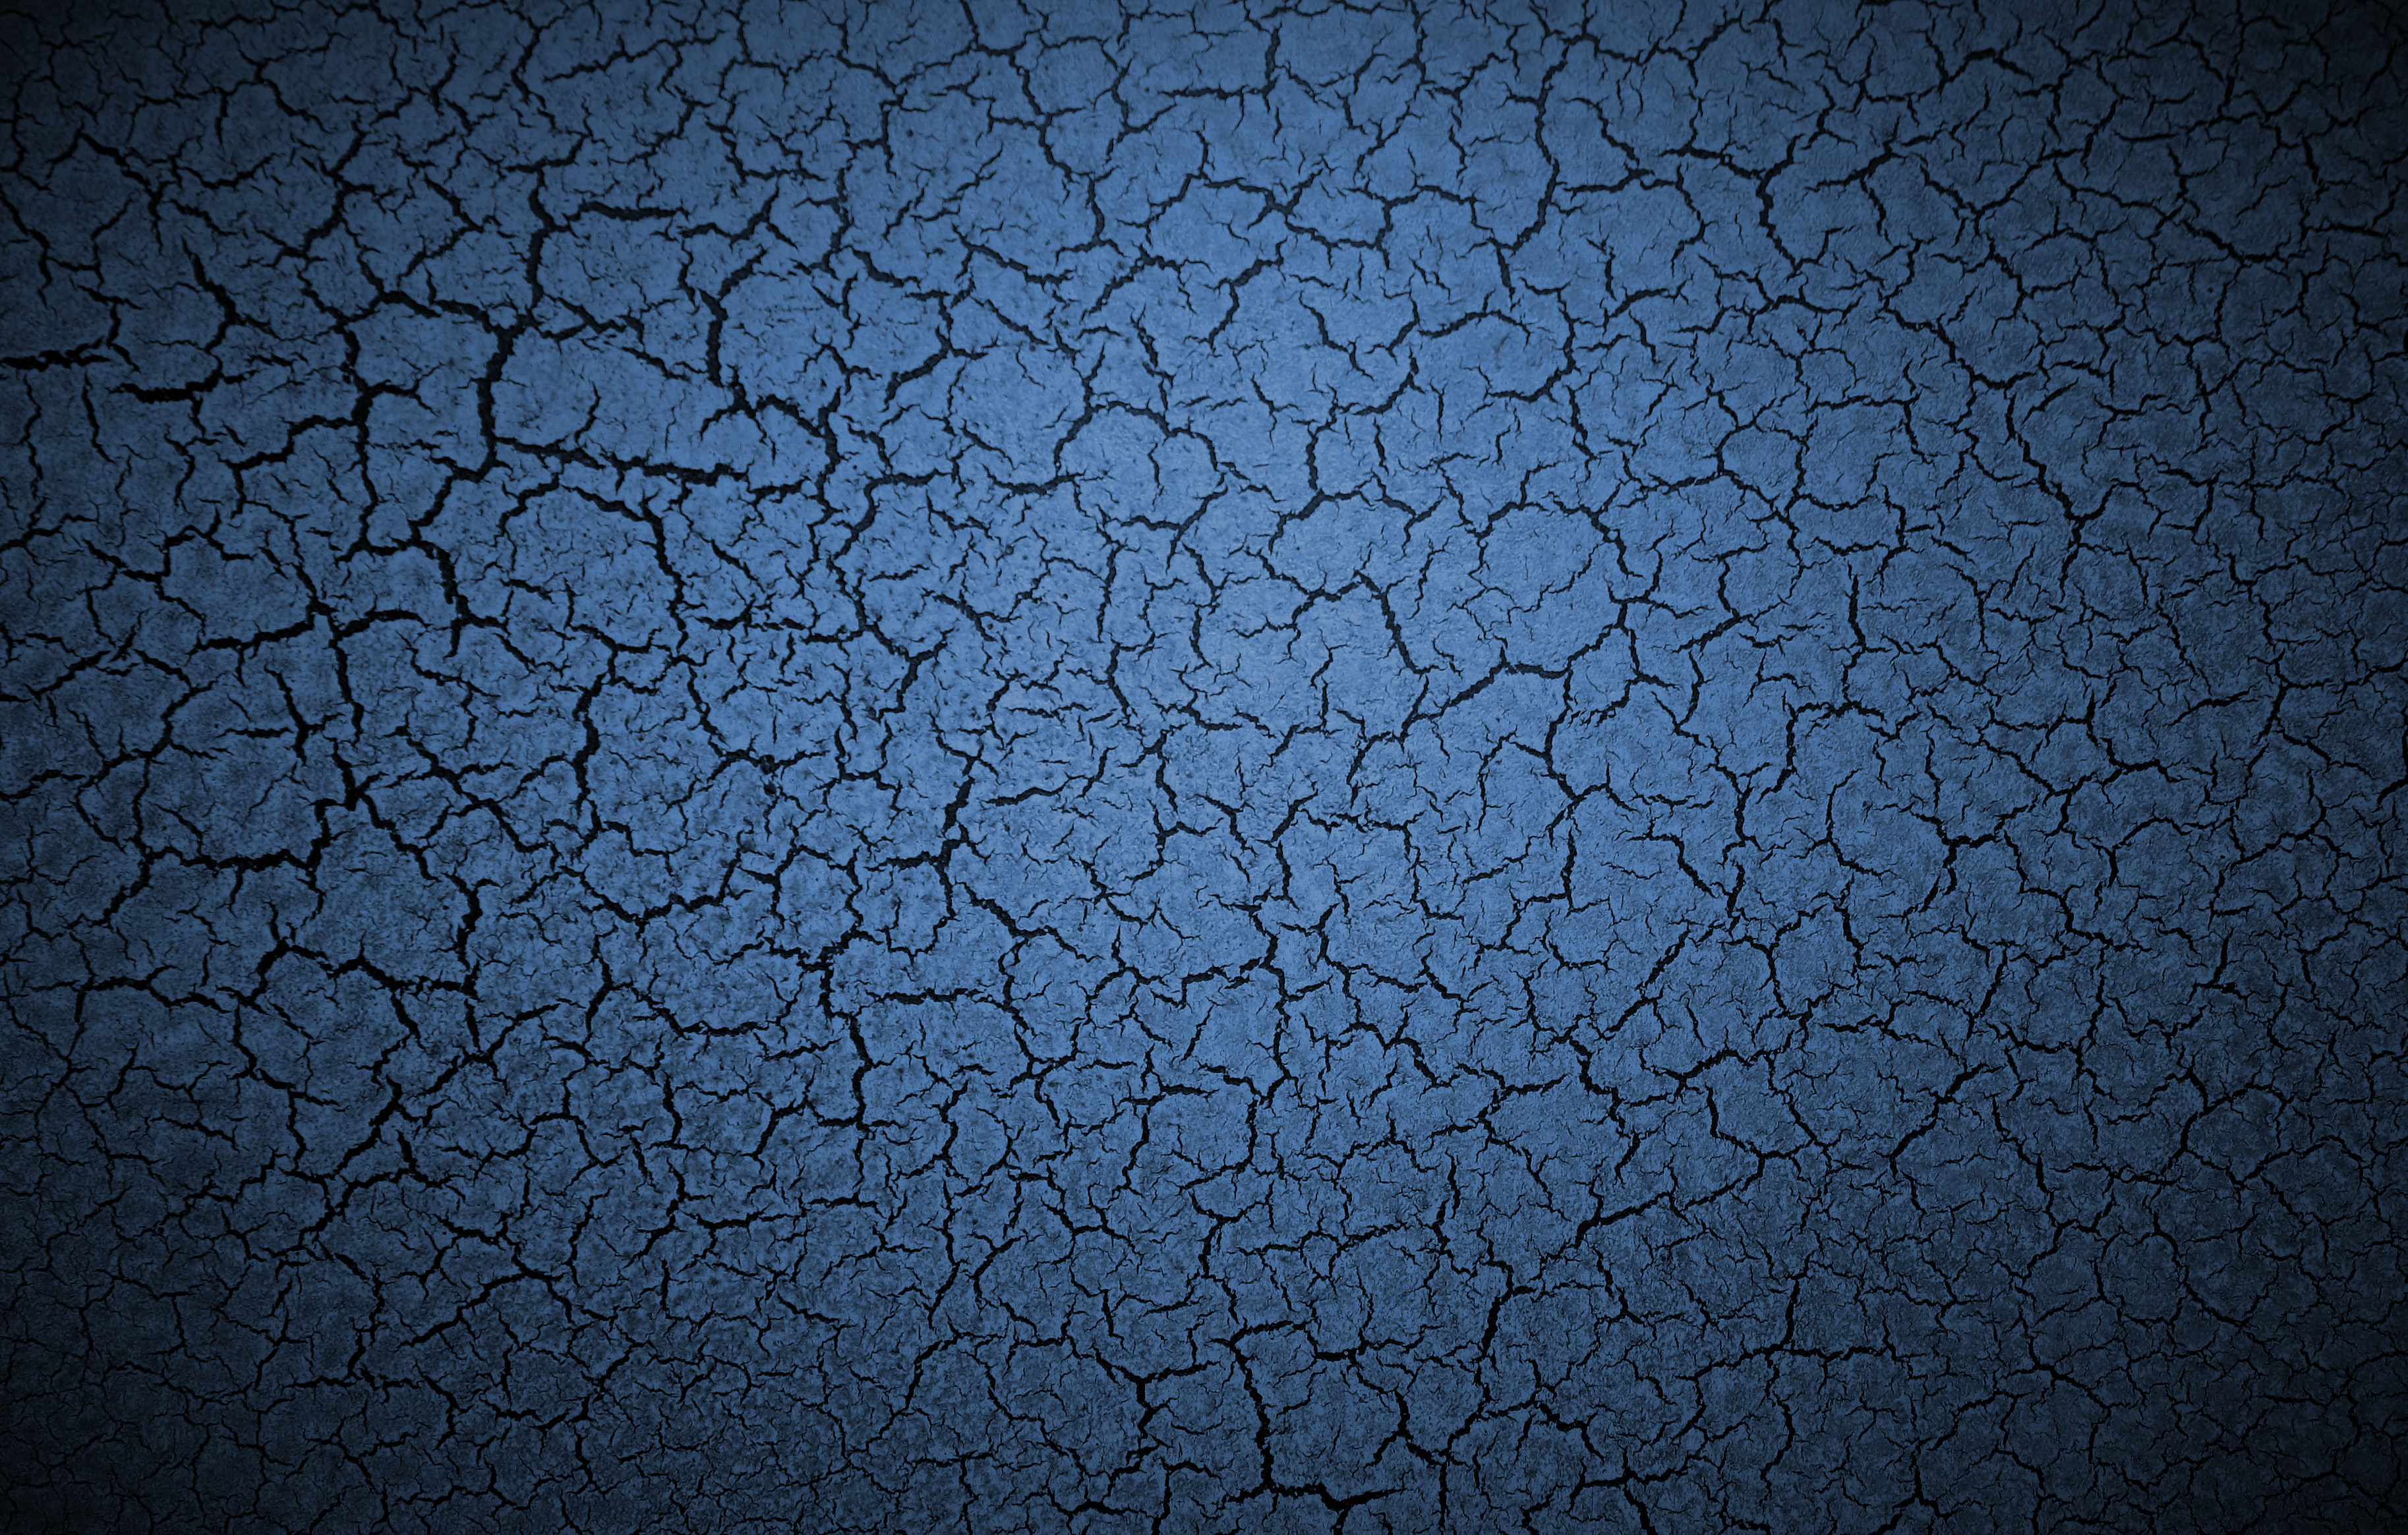 Download wallpaper blue background texture texture cracked section textures in resolution x